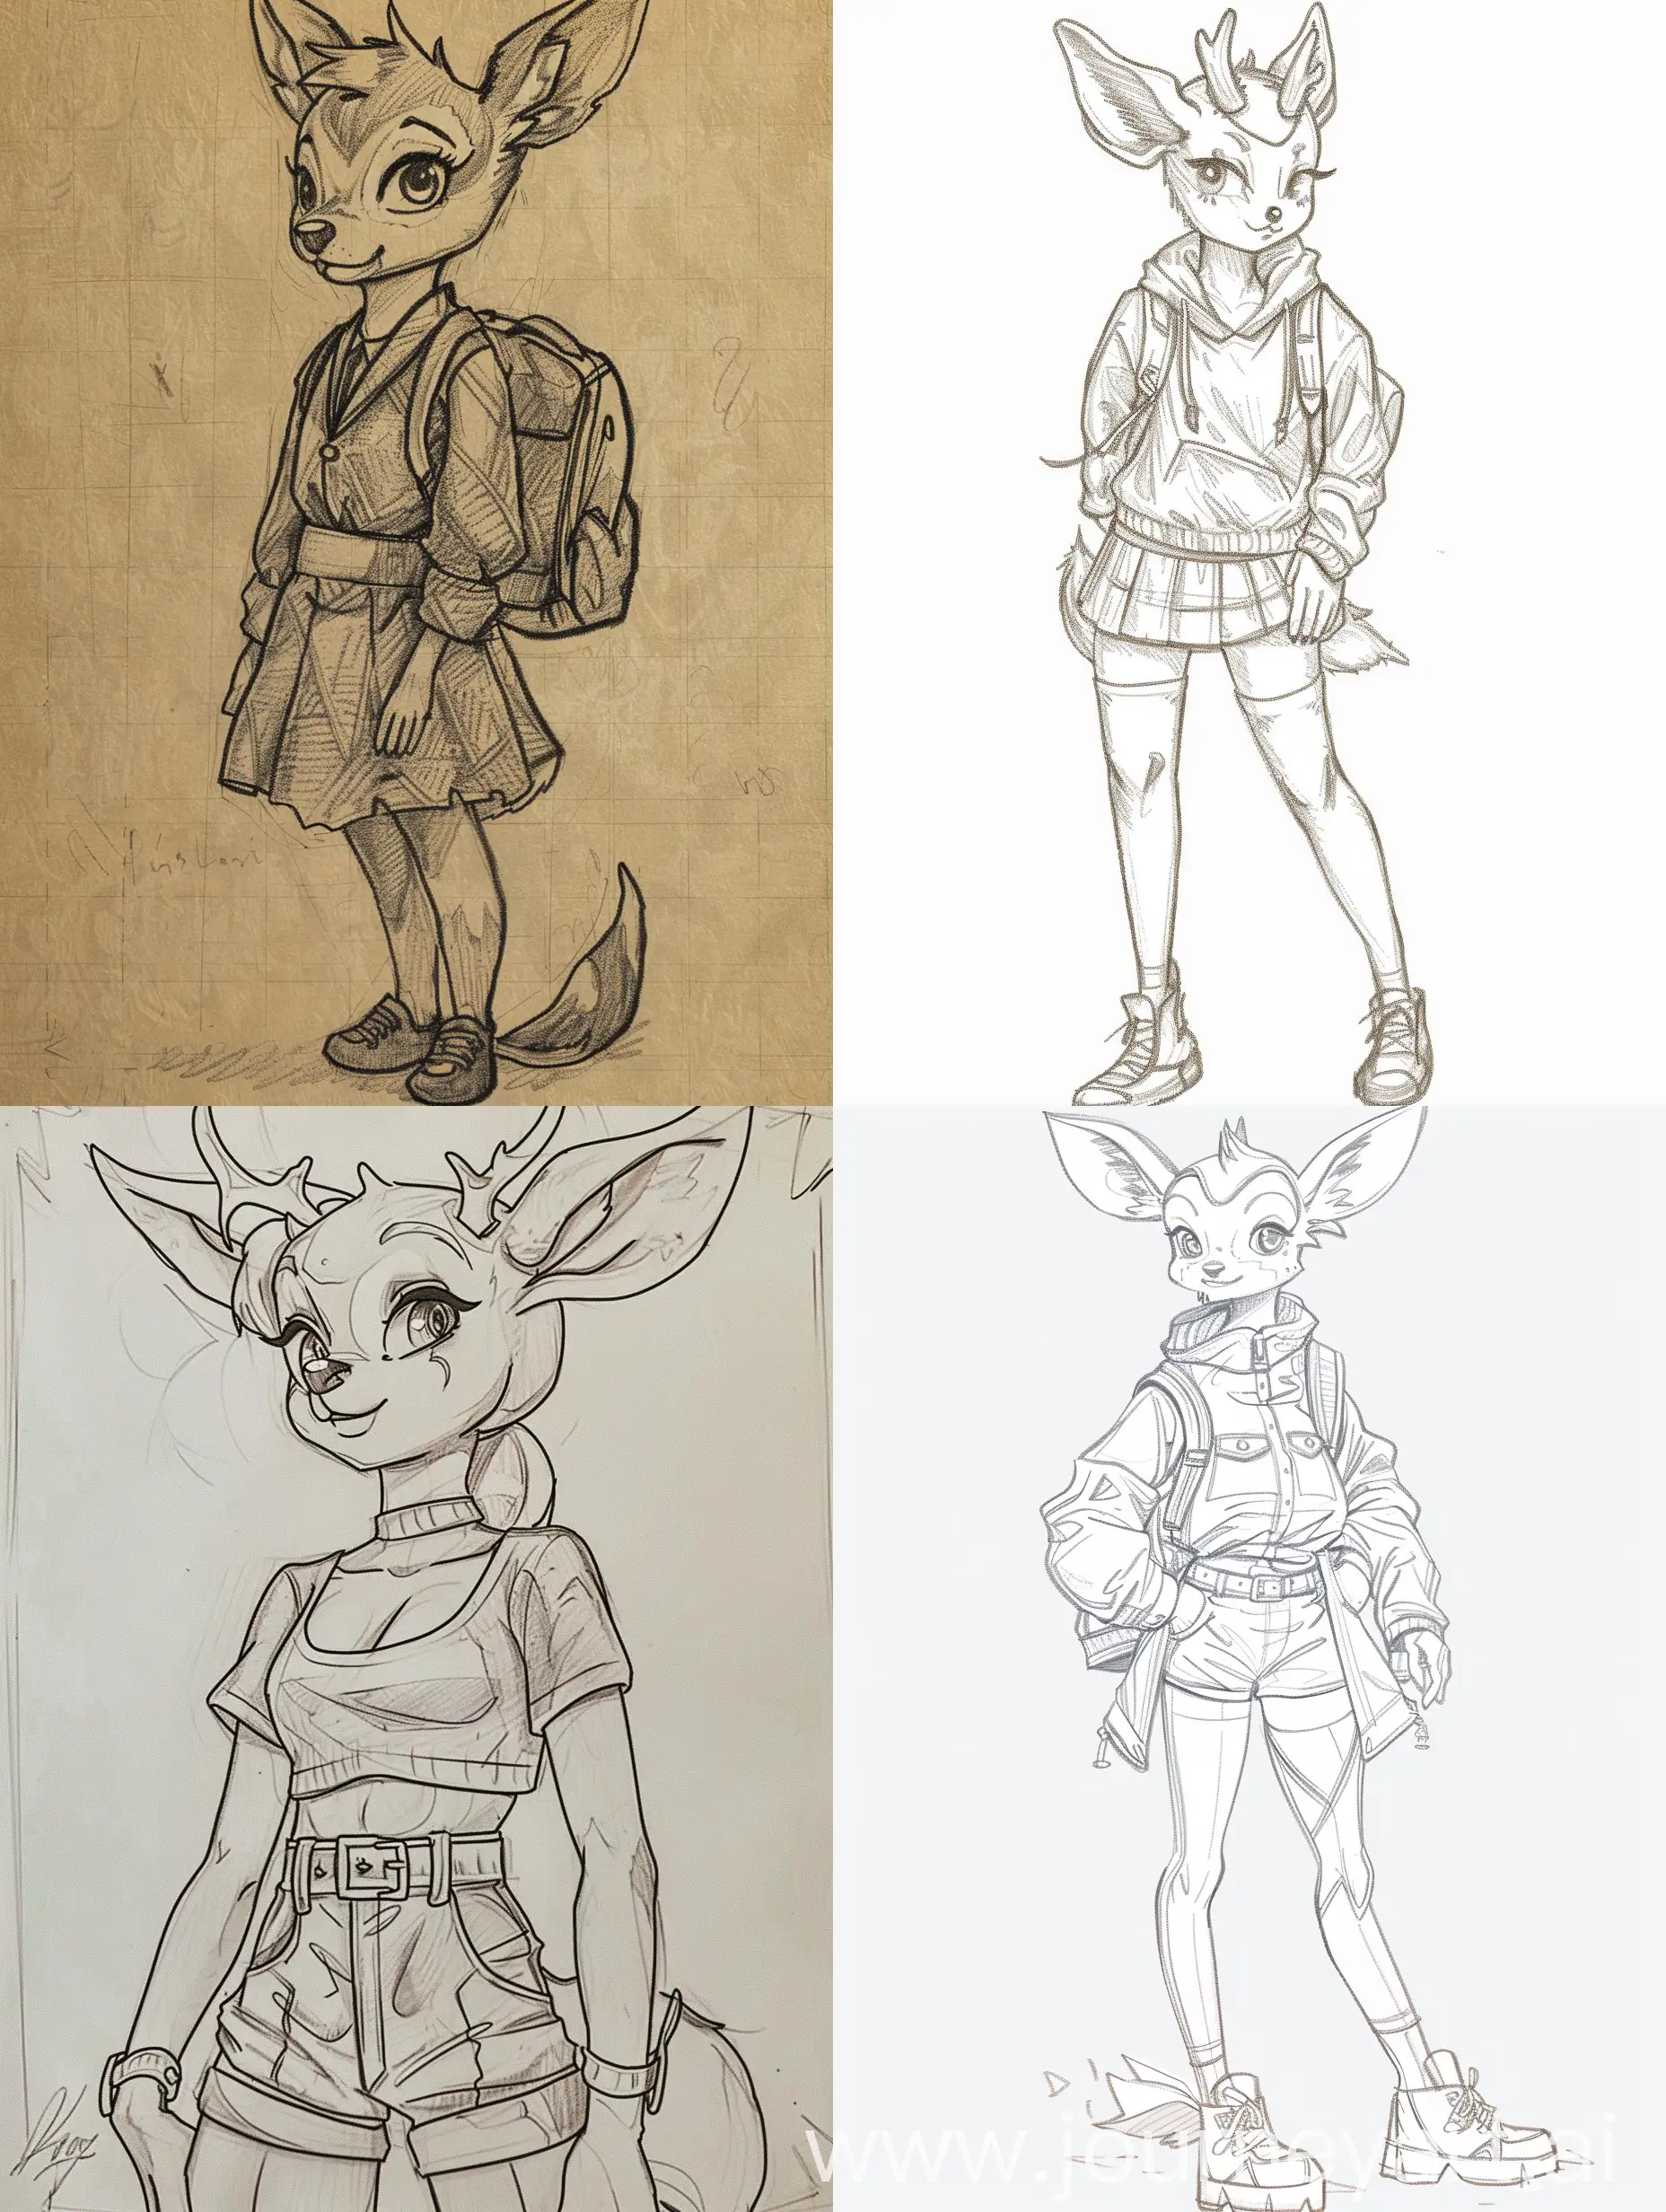 a drawing of a furry reference of an anthropomorphic deer girl, her clothes are simple, but reflect her character: mischievous, cheerful, creative and emotional personality